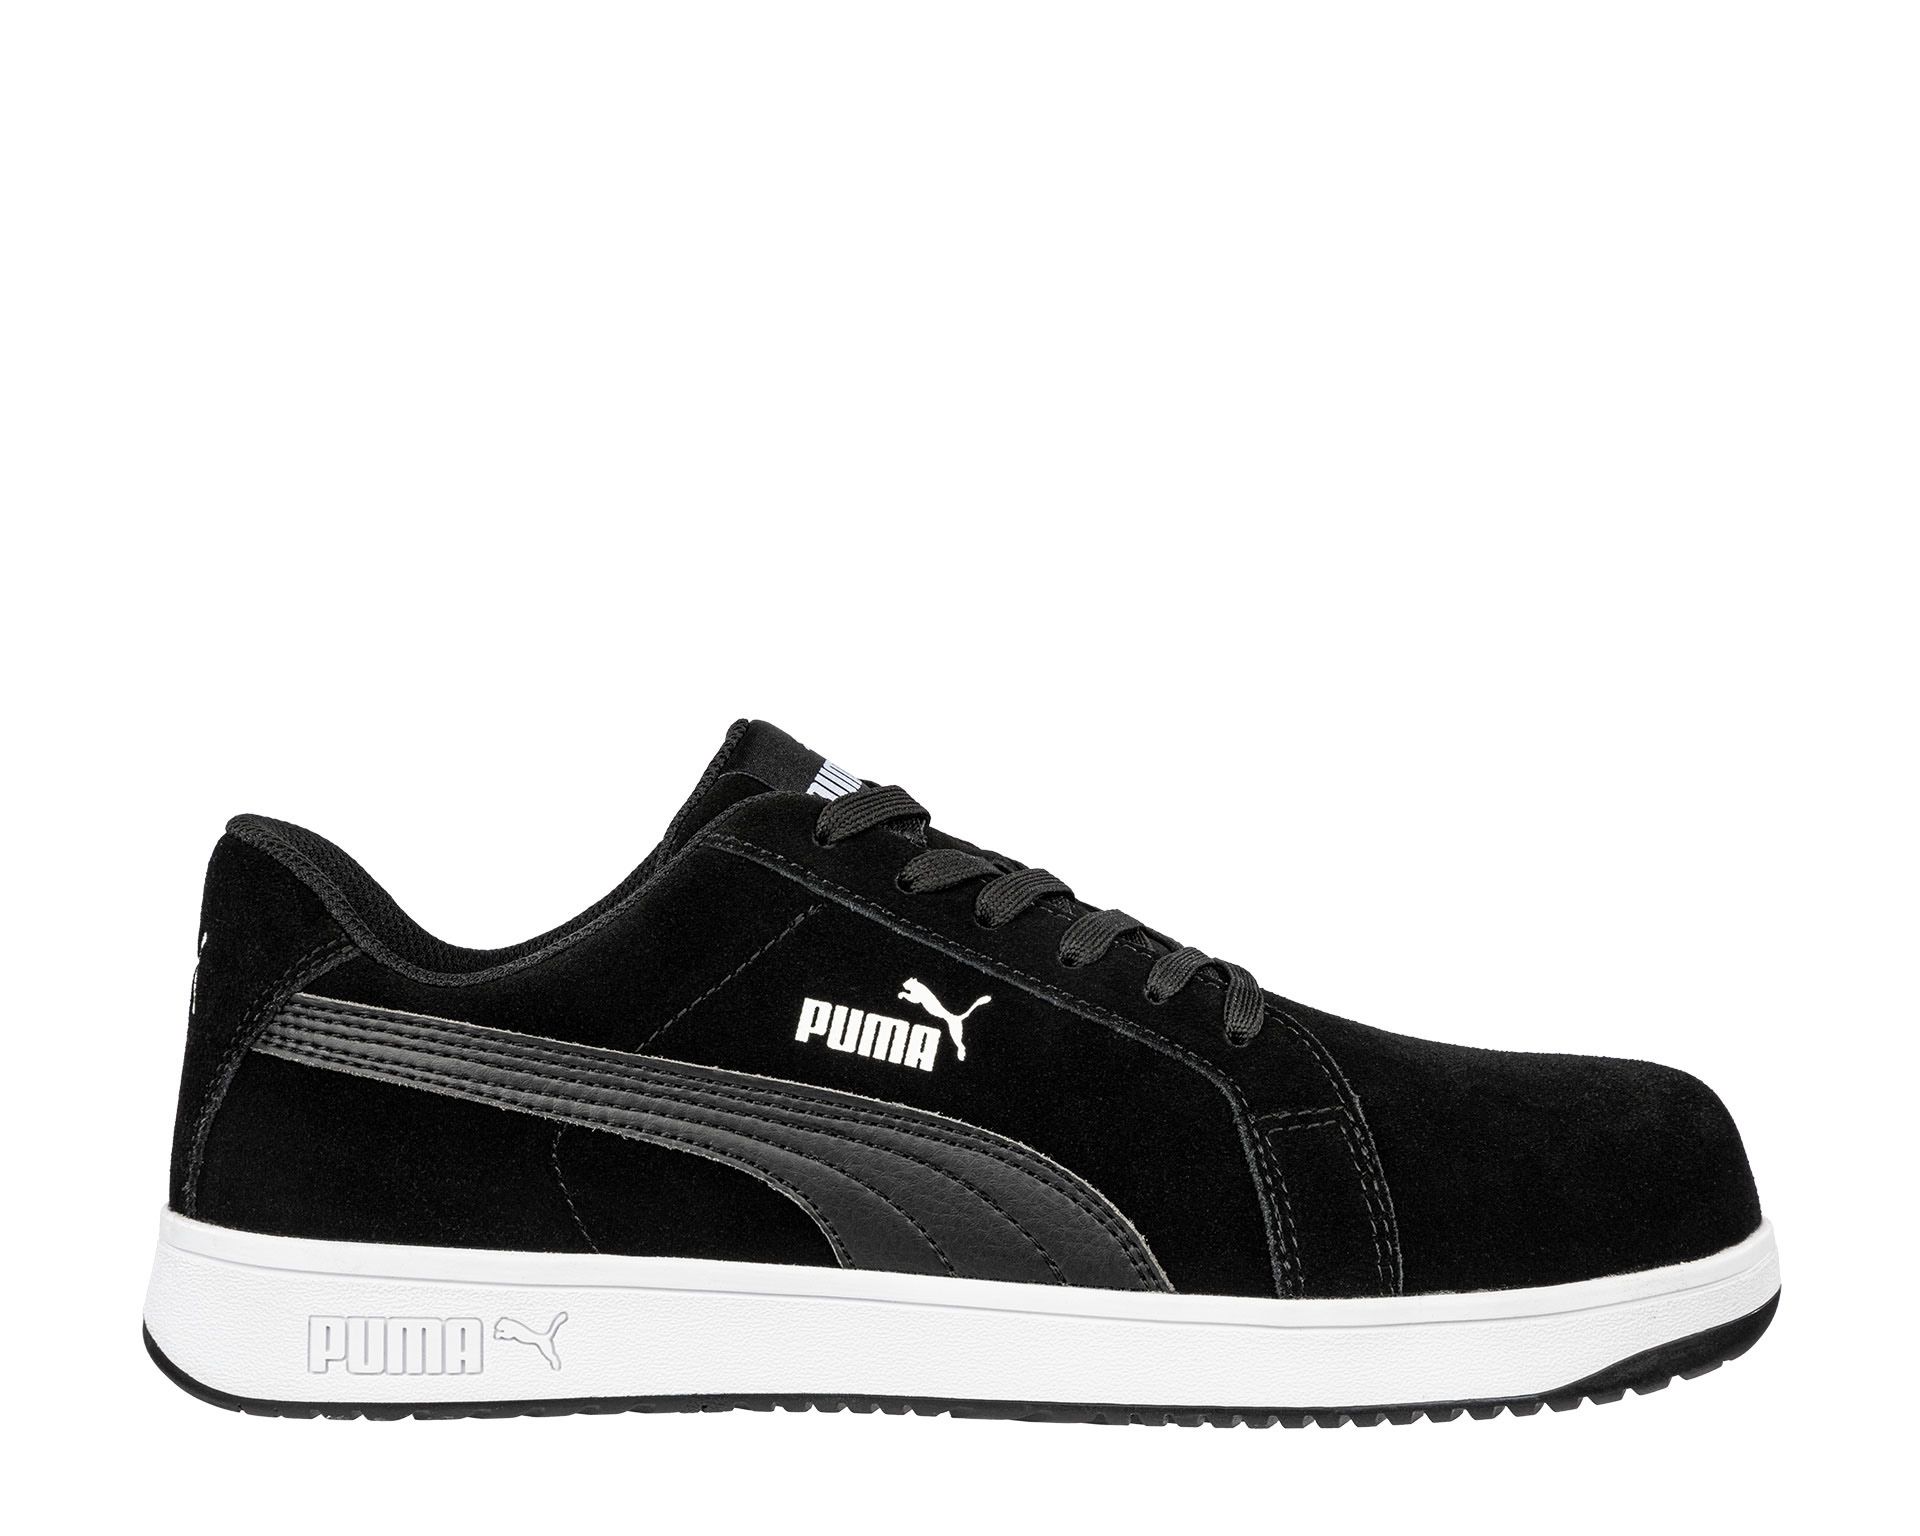 Chaussures de protection homme Puma Safety